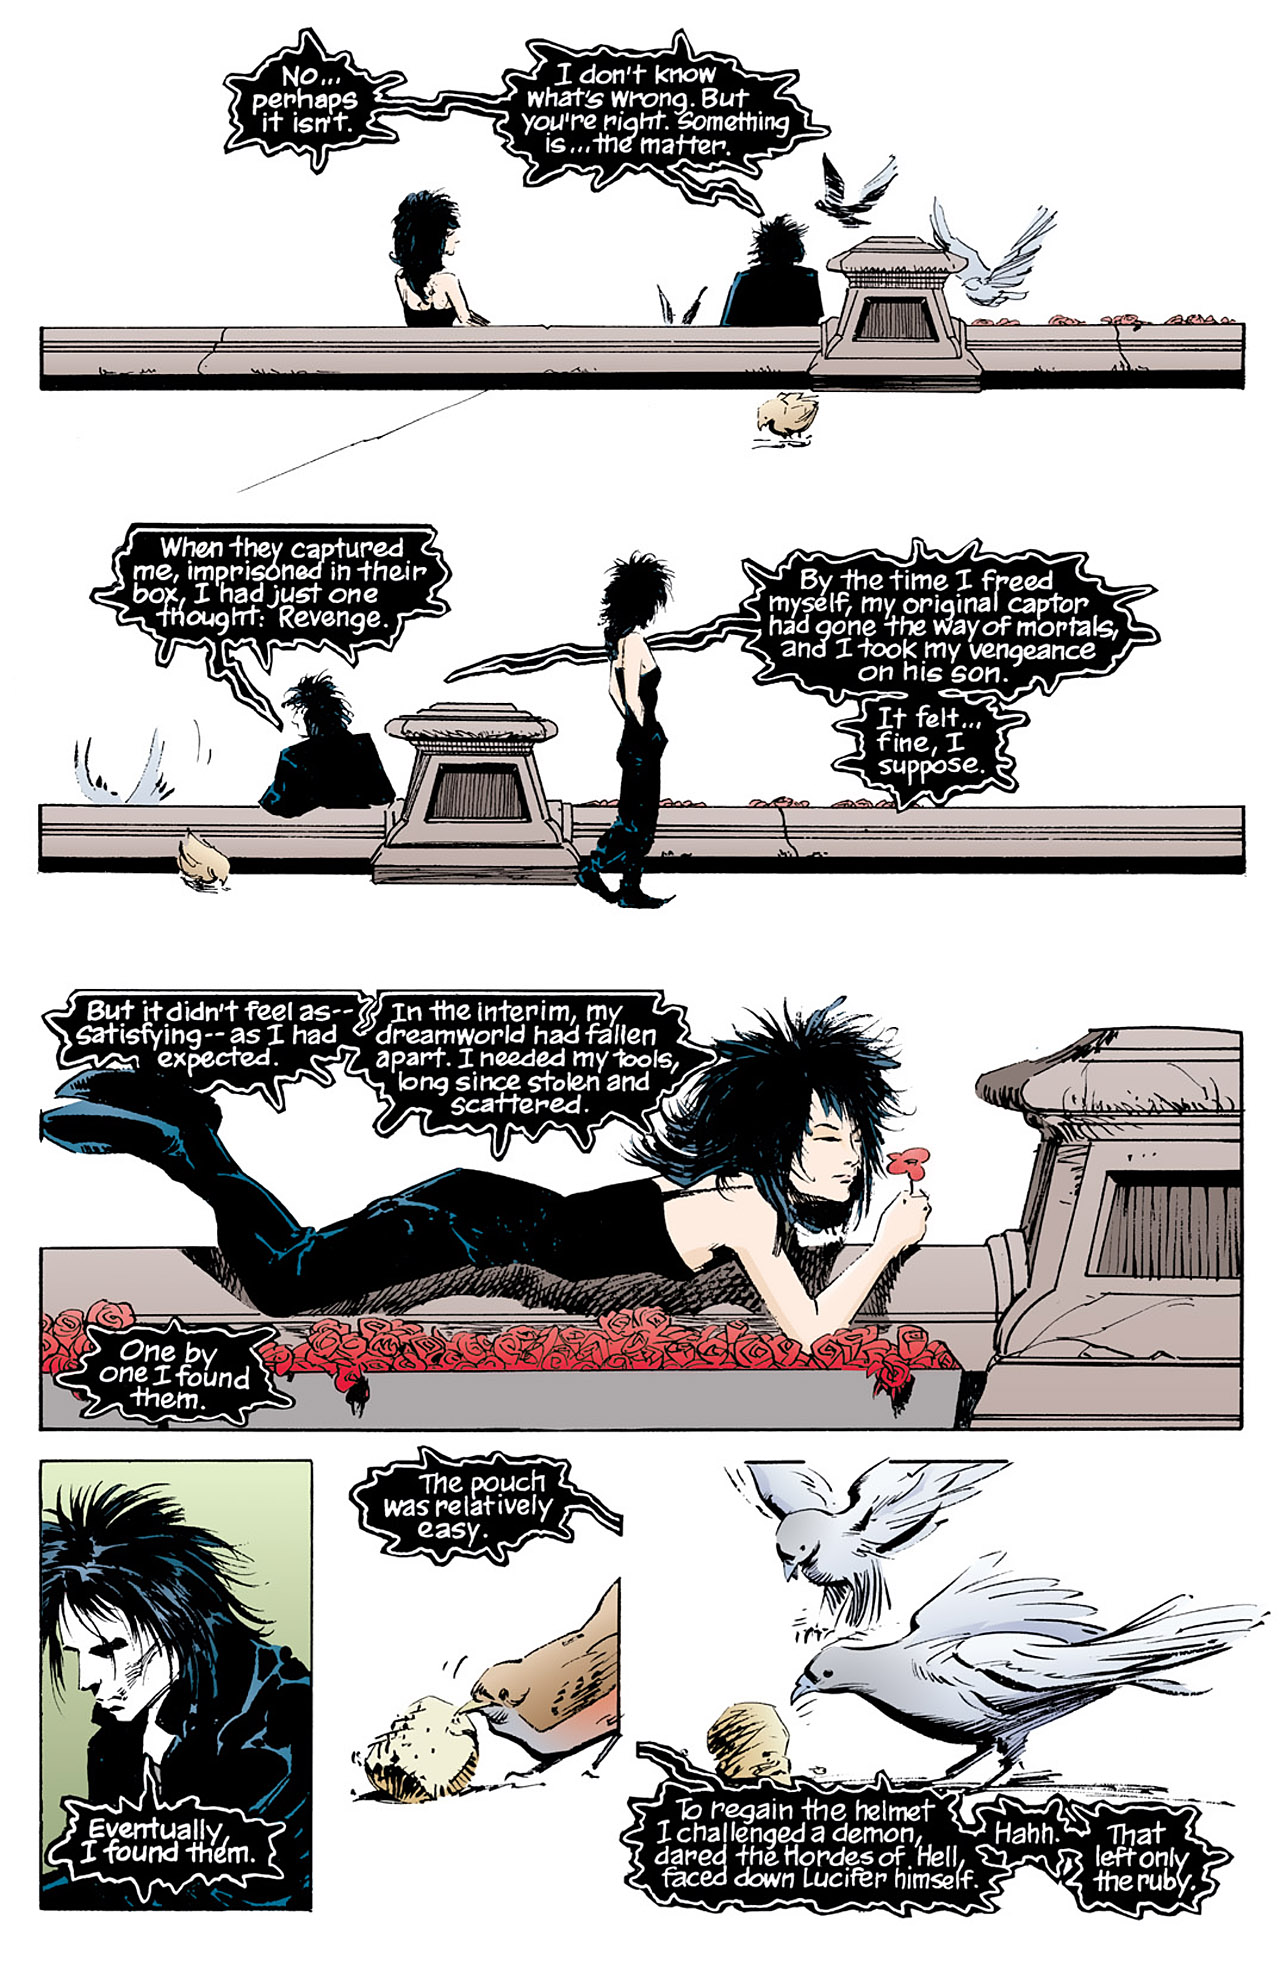 The Sandman (1989) issue 8 - Page 9